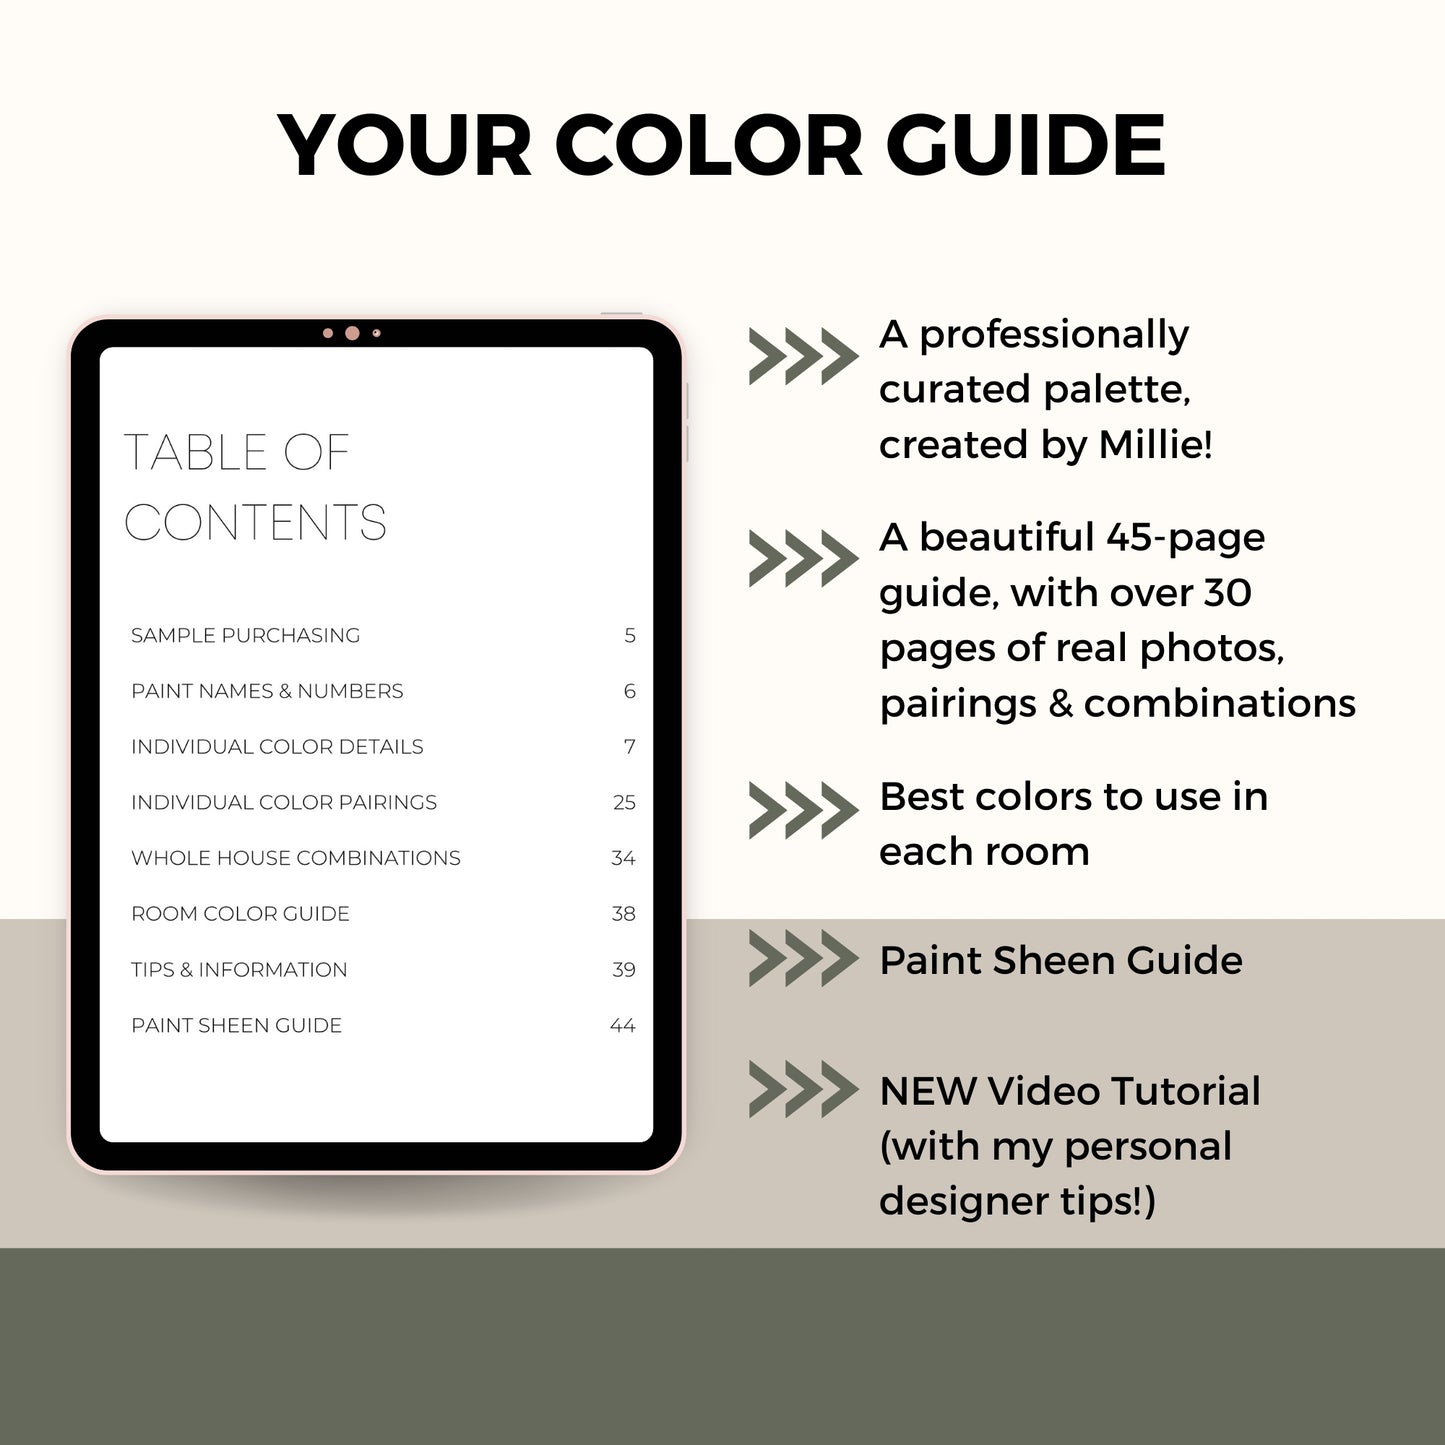 Lake Home Sherwin Williams Paint Palette - Modern Neutral Interior Paint Colors for Home, Coastal Interior Design Color Palette, Lake House, Sherwin Williams Evergreen Fog